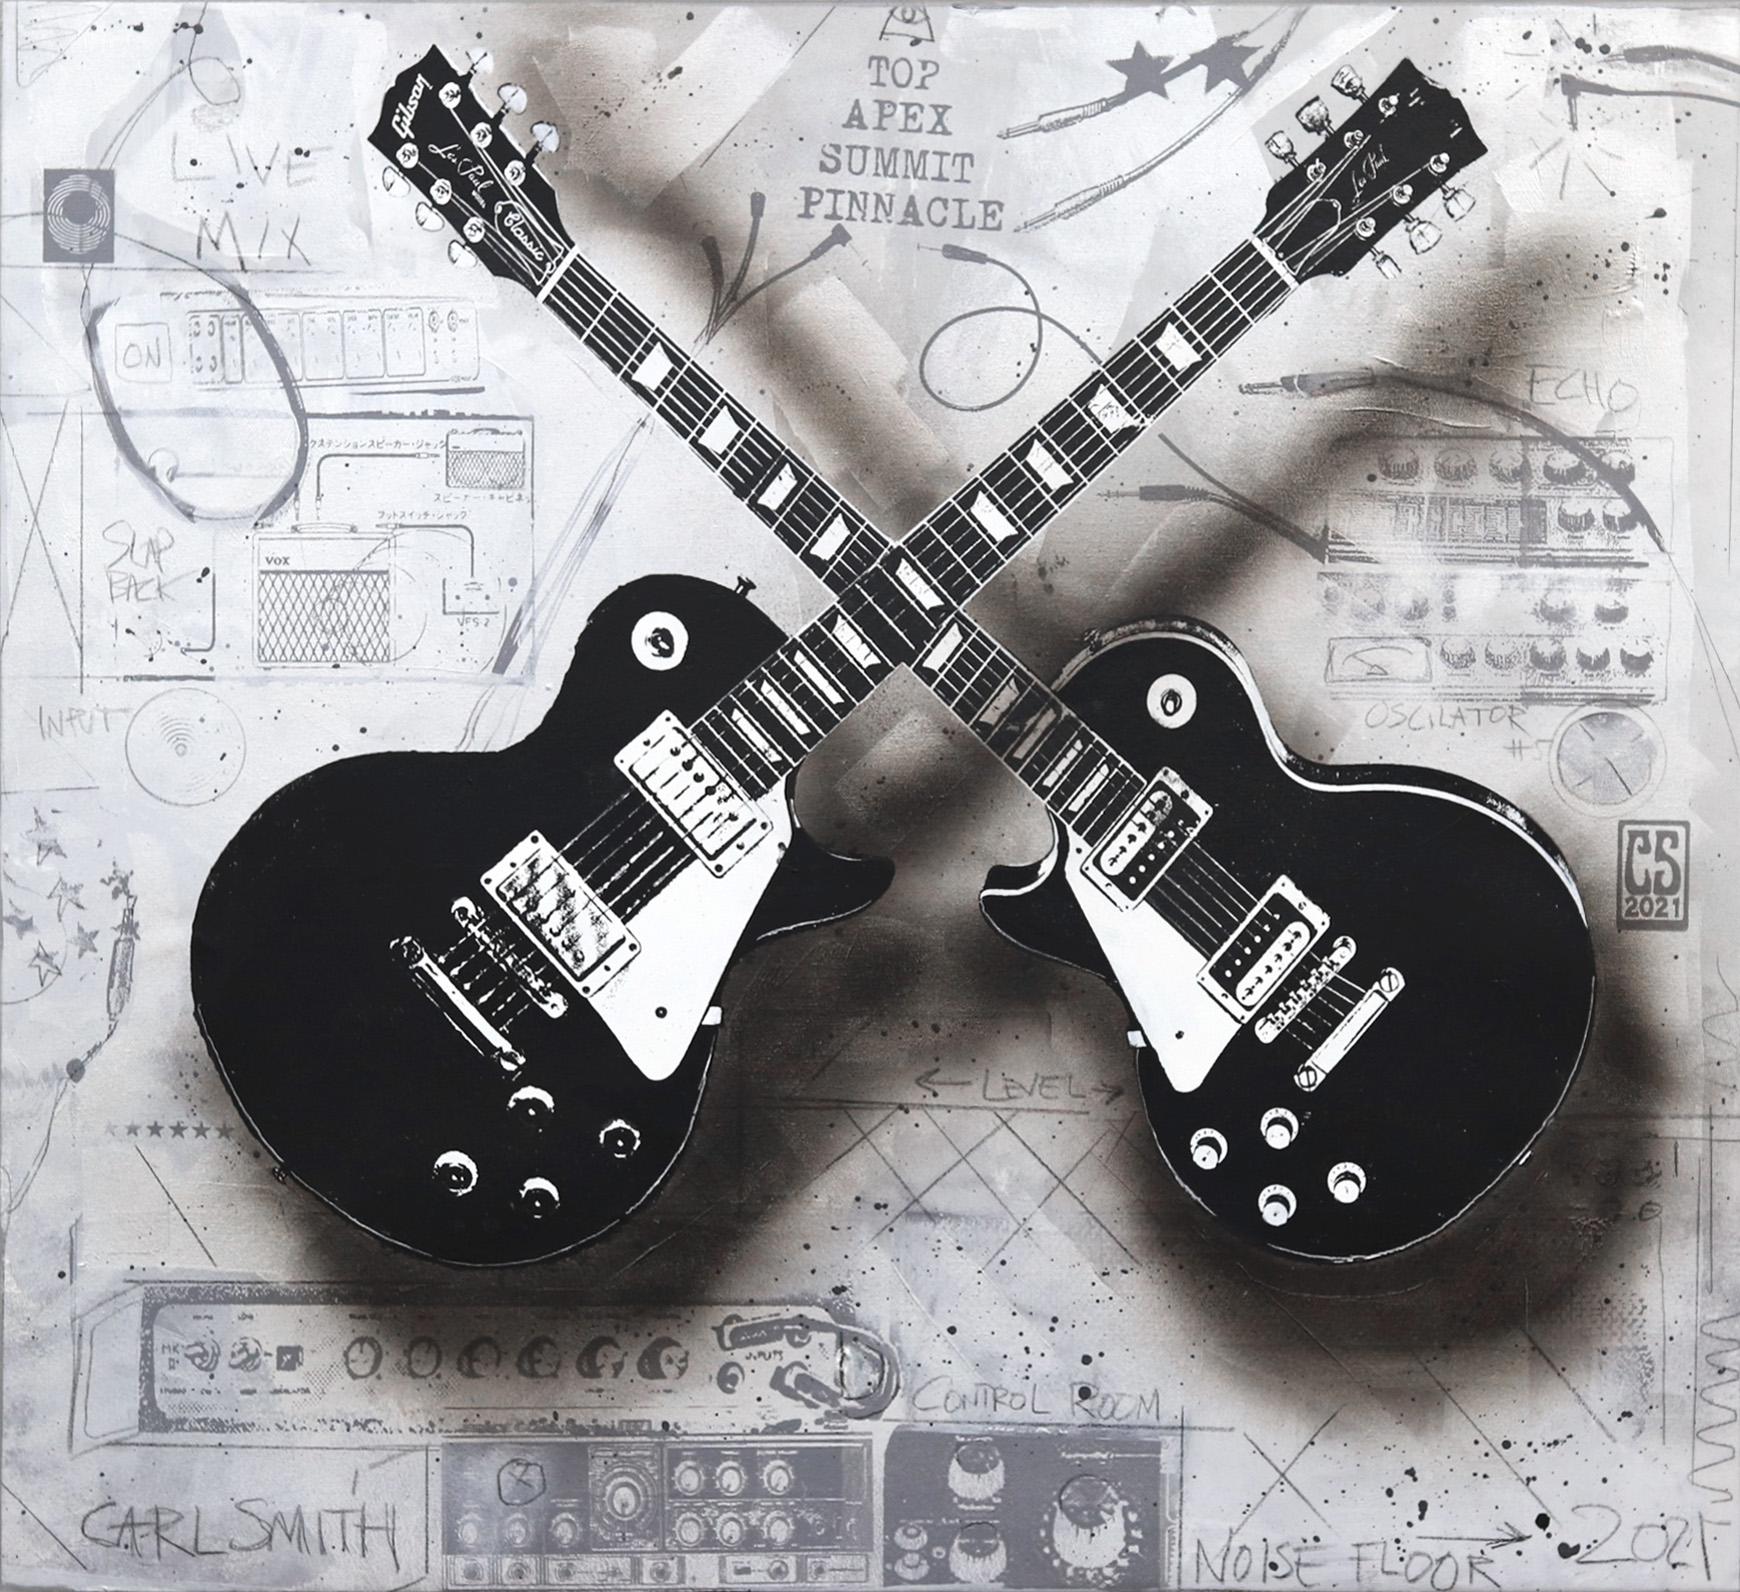 Top Apex - Original Electric Guitar Duet on Canvas: A Sonic Symphony in Art